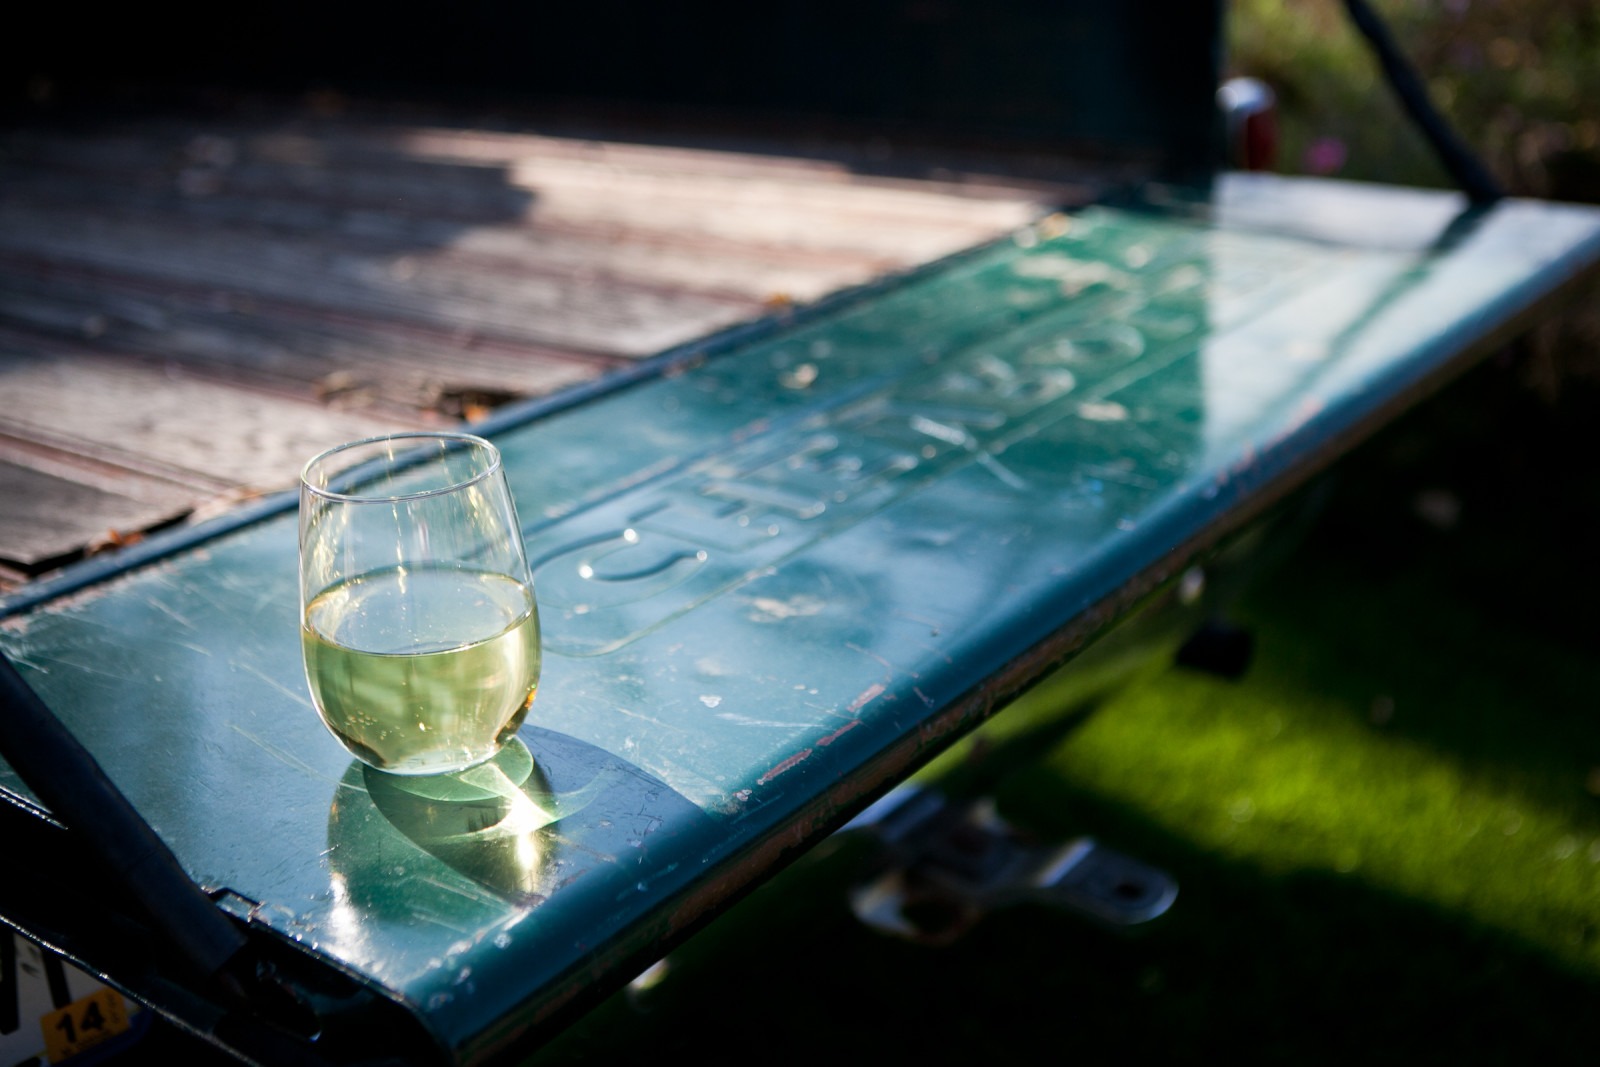 a glass of wine sits on the tailgate of an old truck